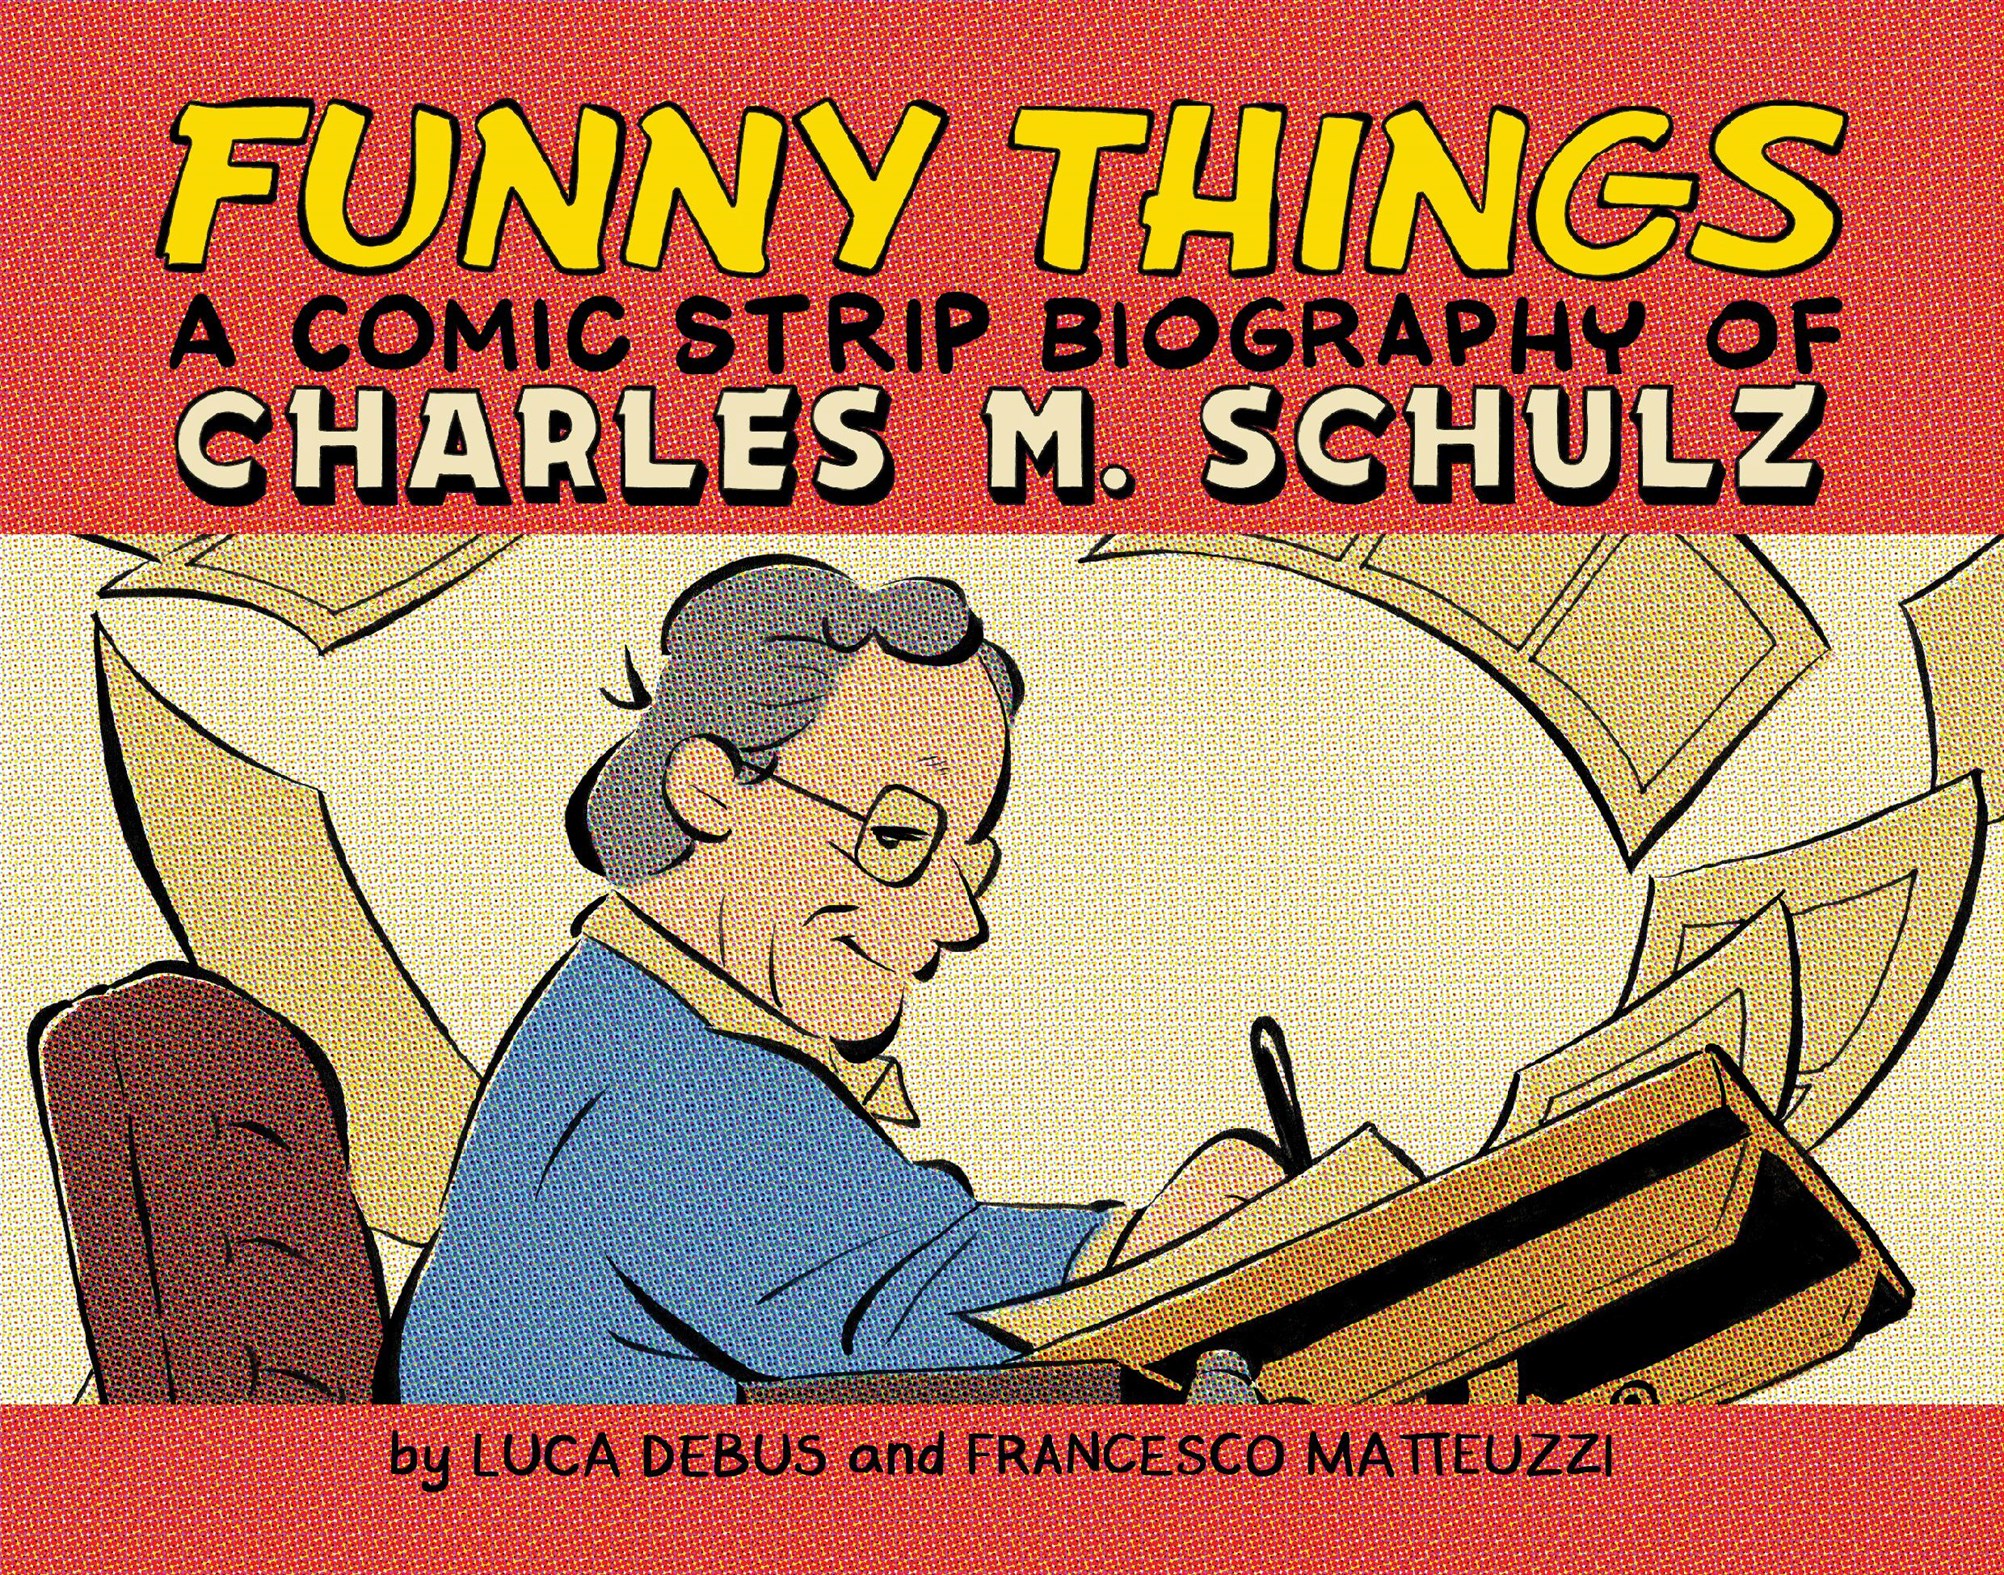 Read online Funny Things: A Comic Strip Biography of Charles M. Schulz comic -  Issue # TPB (Part 1) - 1